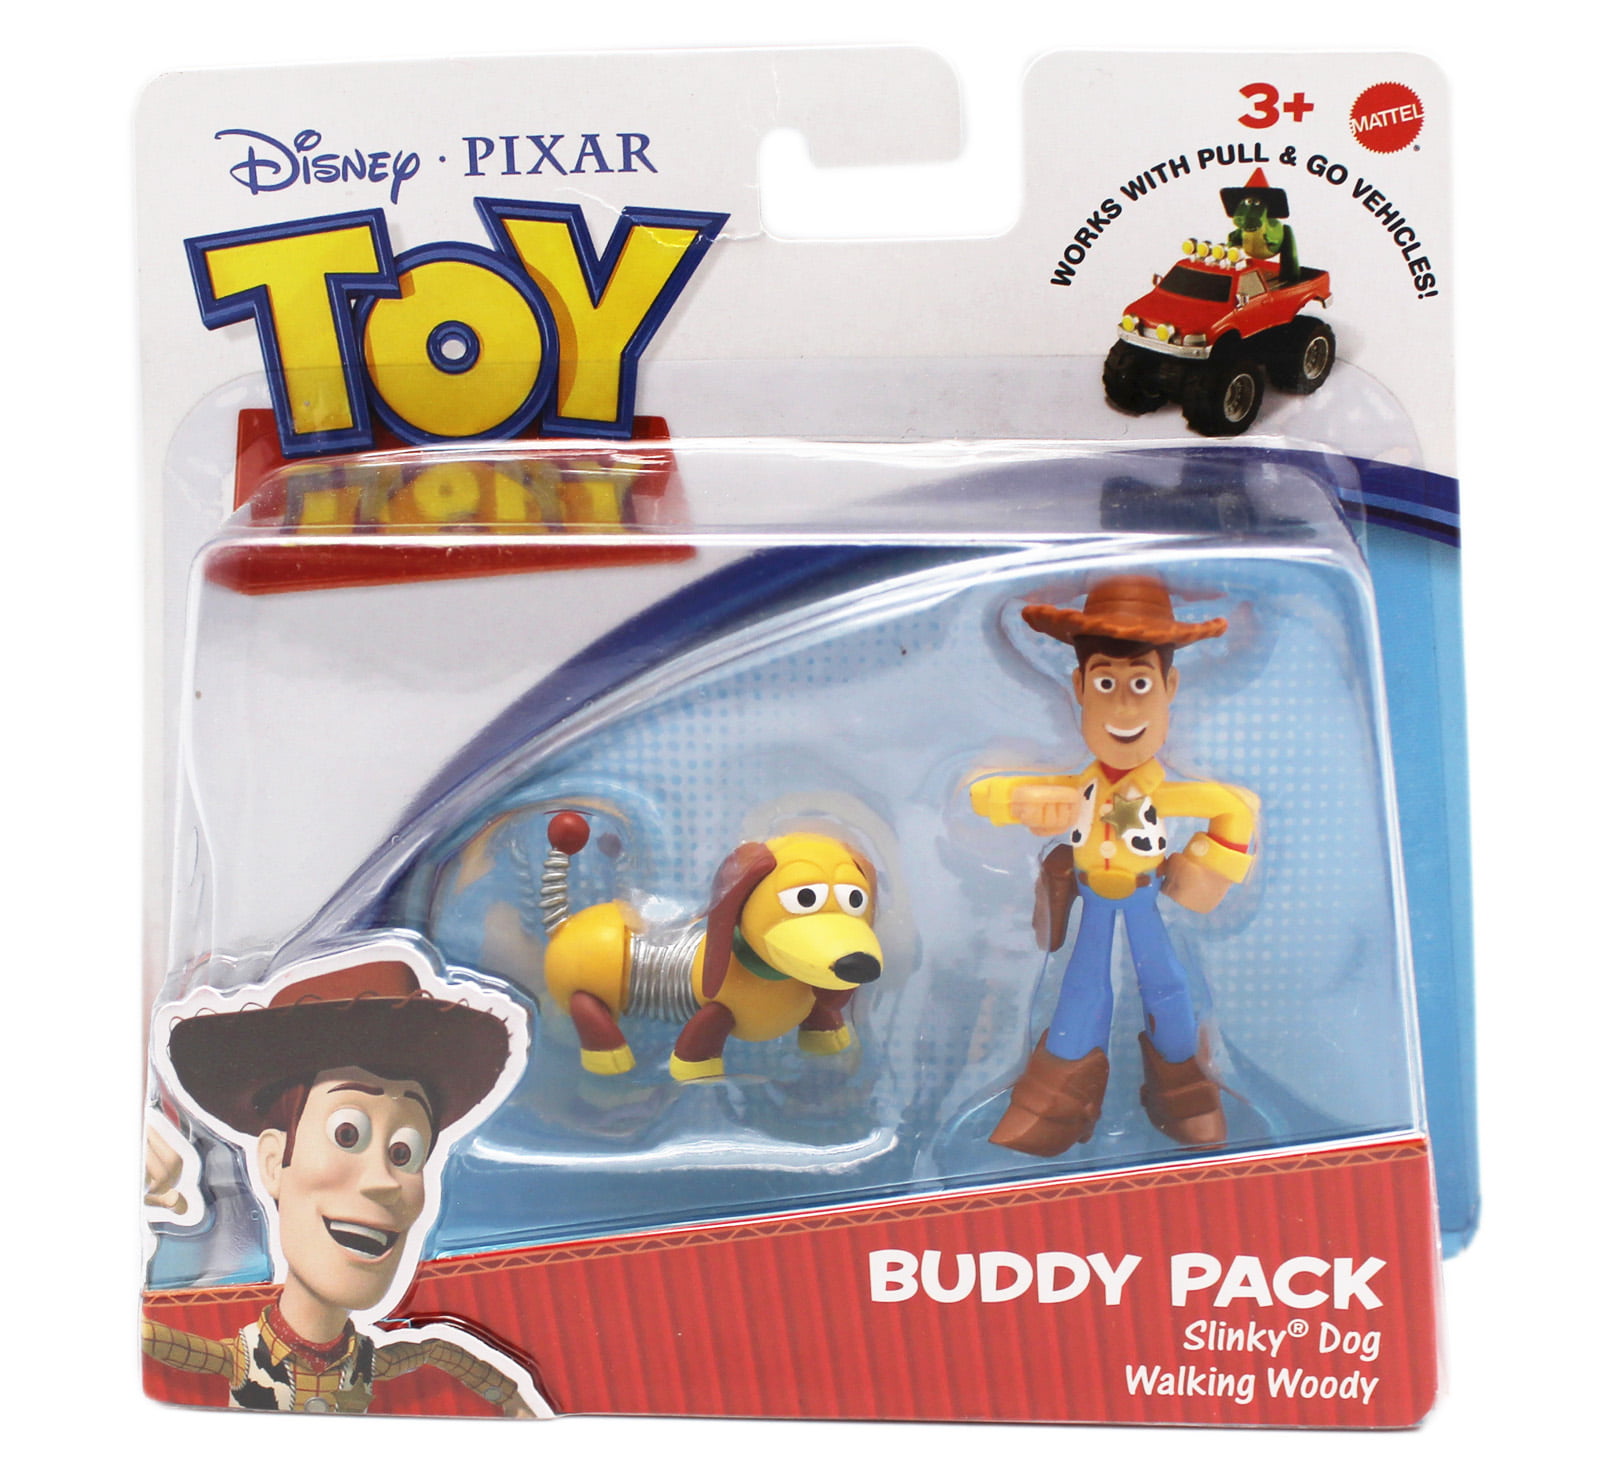 Officially Licensed 2" Disney Toy Story Figures Action Figure 2 Pack Age 3+ 